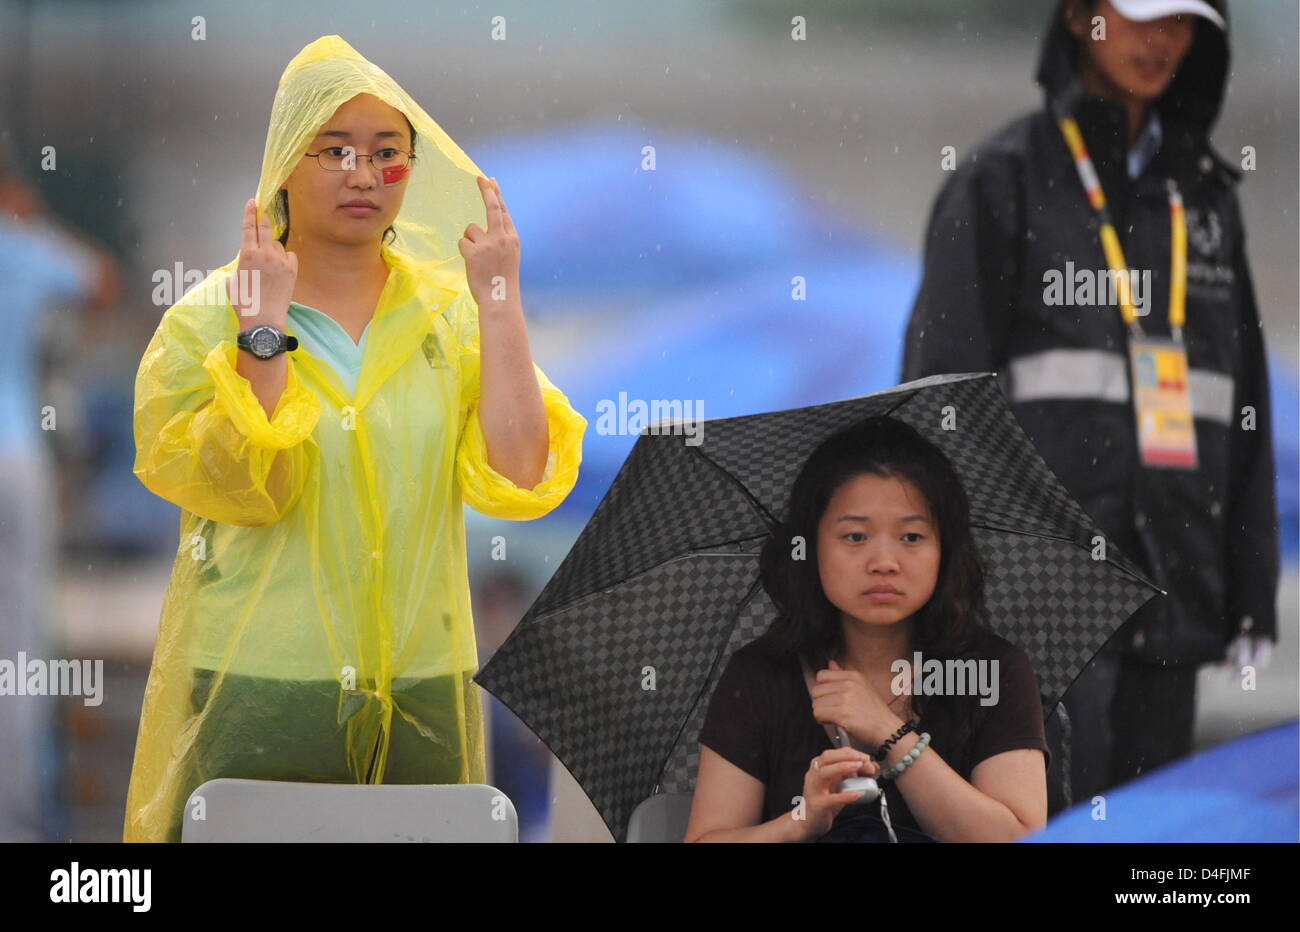 Spectators standing in the rain at the Olympic Green Tennis Center during a rain delay at the Beijing 2008 Olympic Games at the National Aquatics Center in Beijing, China 10 August 2008. The 1st round match mens single tennis match of Nicolas Kiefer from Germany and Max Mirnyi from Belarus is unhold because of heavy rain. Photo: Karl-Josef Hildenbrand dpa ###dpa### Stock Photo